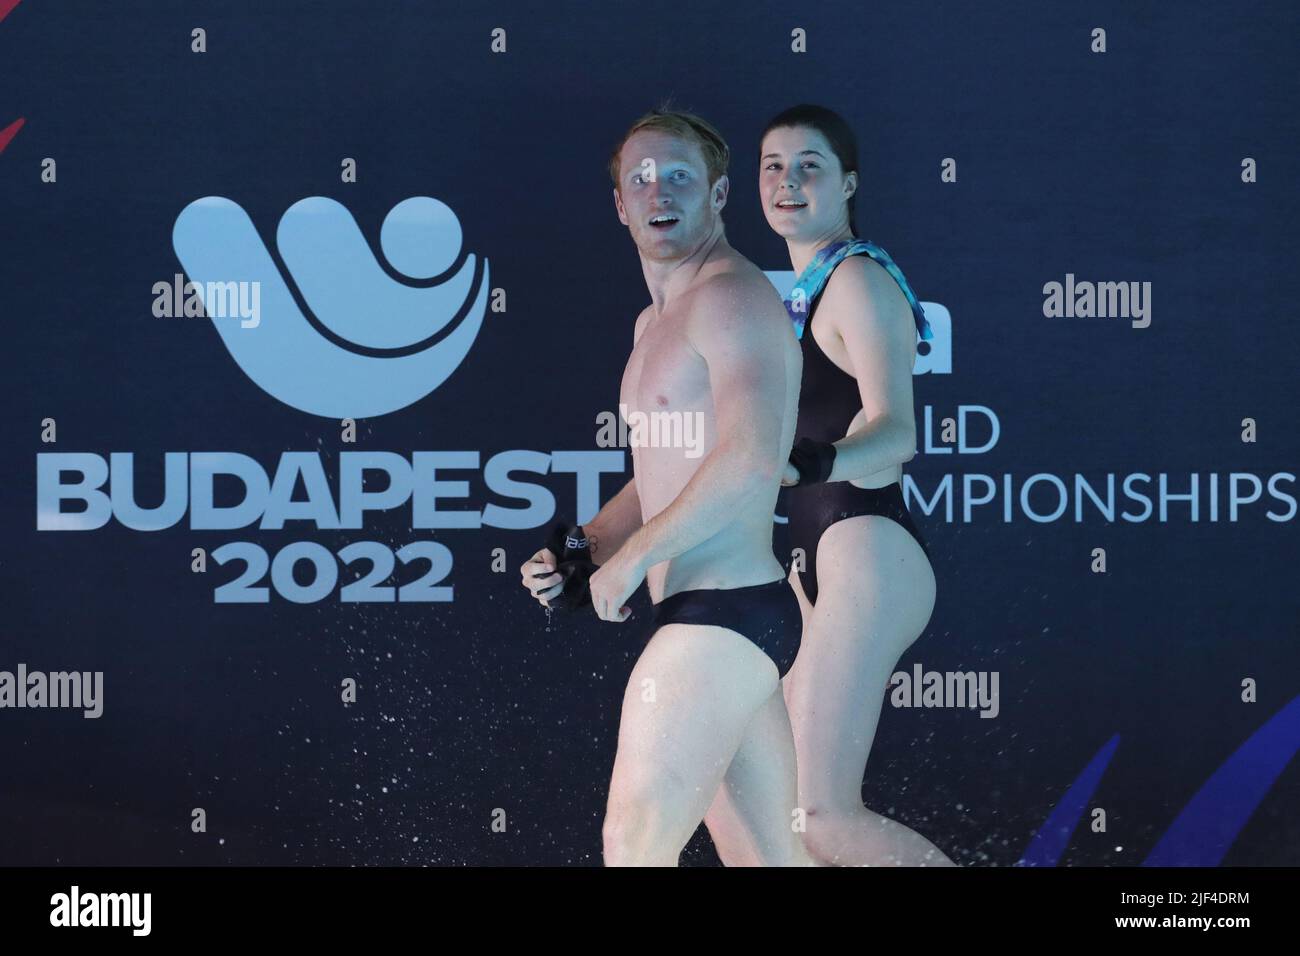 Budapest, Hungary. 29th June, 2022. Andrea Spendolini Sirieix (R)/James Heatly of Britain react after the mixed 3m&10m team final of diving at the 19th FINA World Championships in Budapest, Hungary, June 29, 2022. Credit: Zheng Huansong/Xinhua/Alamy Live News Stock Photo